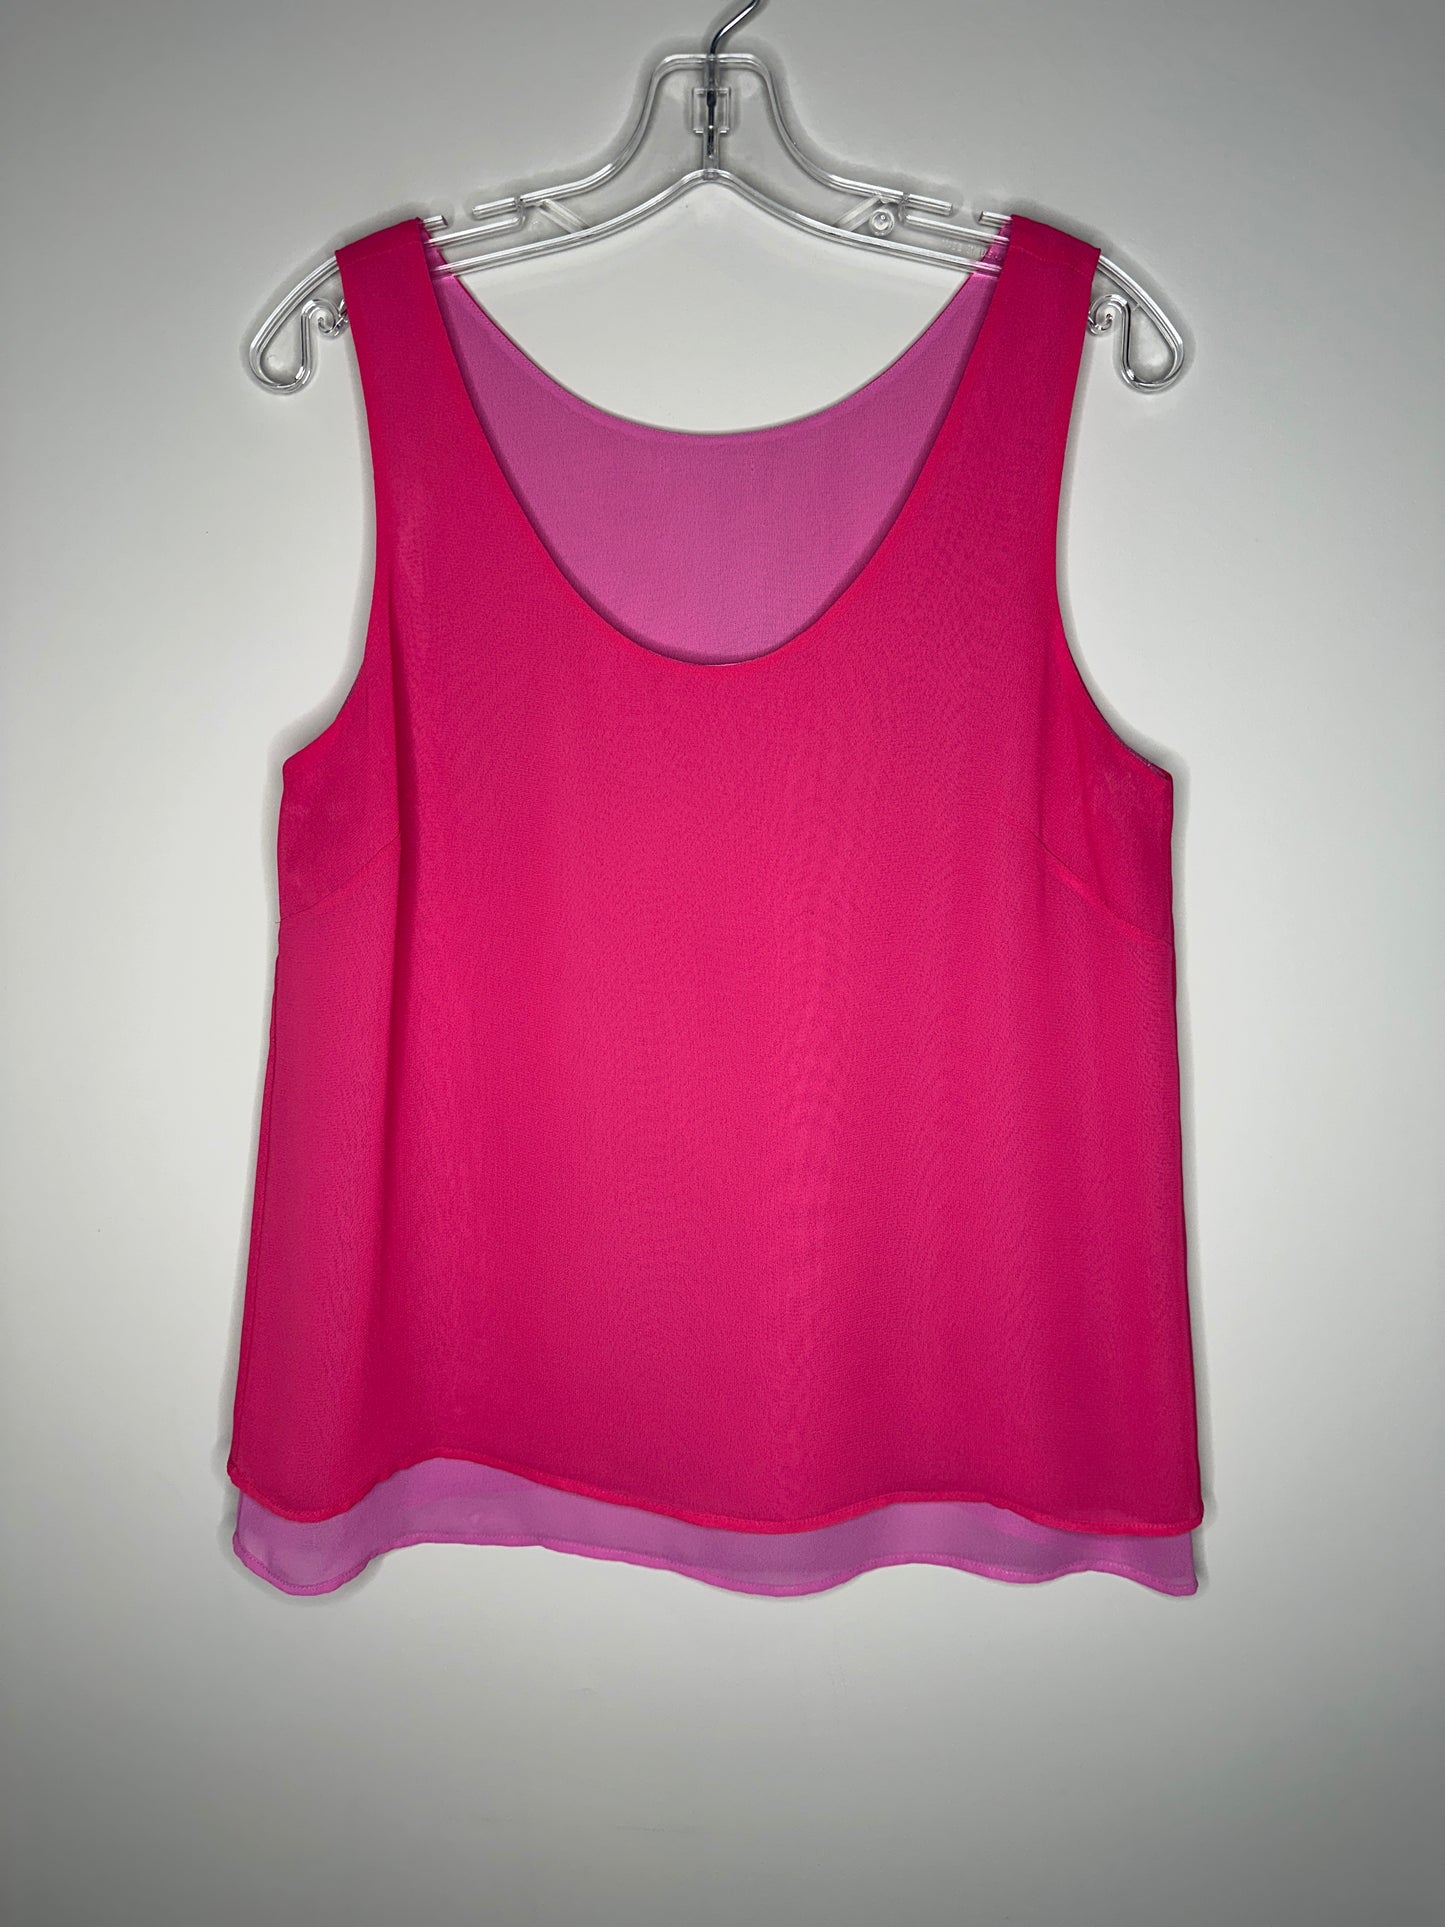 Size L Hot Pink Sleeveless Shell Tank Top (no size tag - please see meas.)